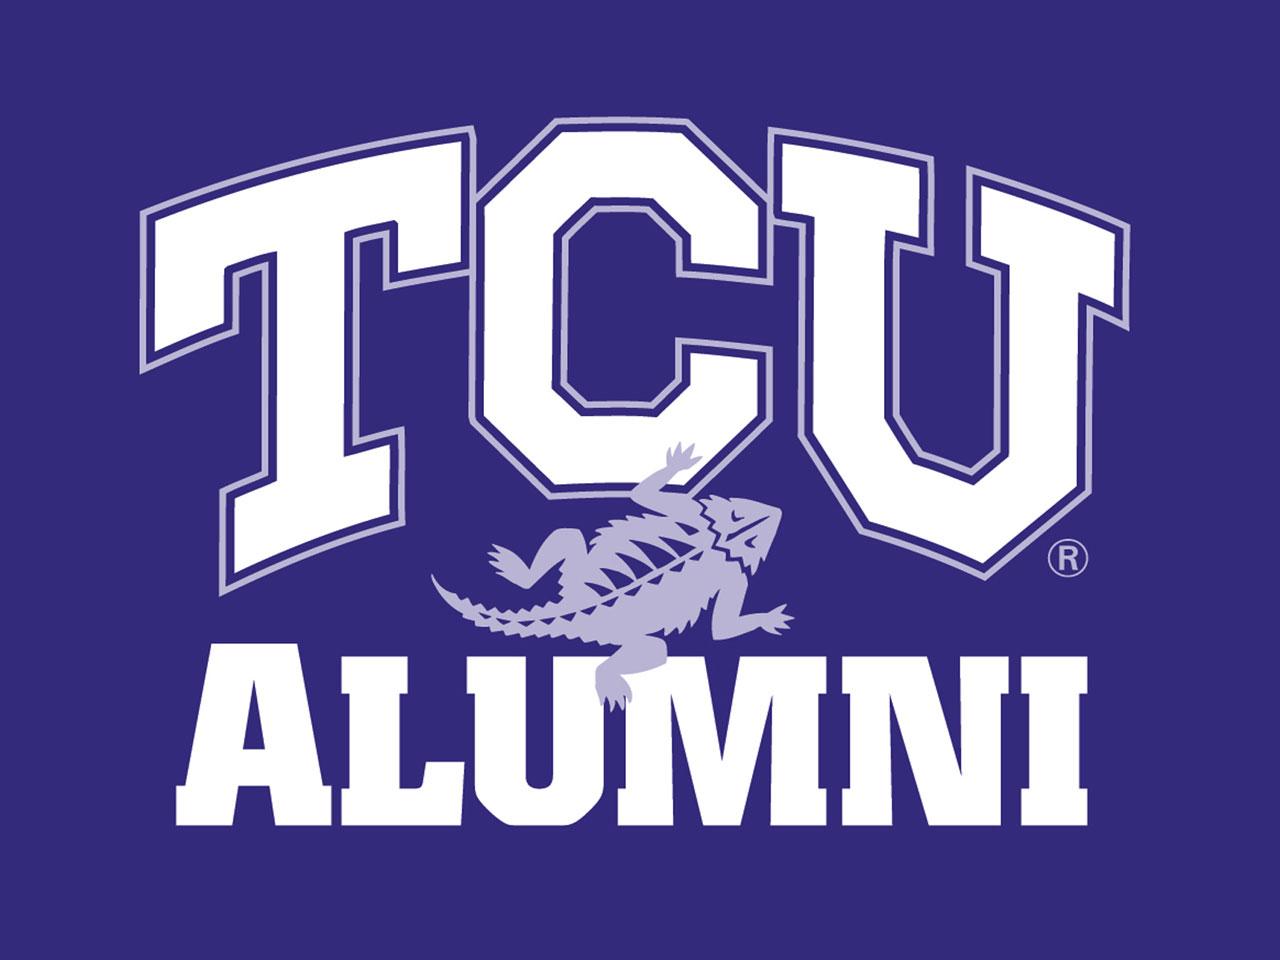 A couple of cool TCU wallpapers  KillerFrogscom  Lowering Office  Productivity since 1997